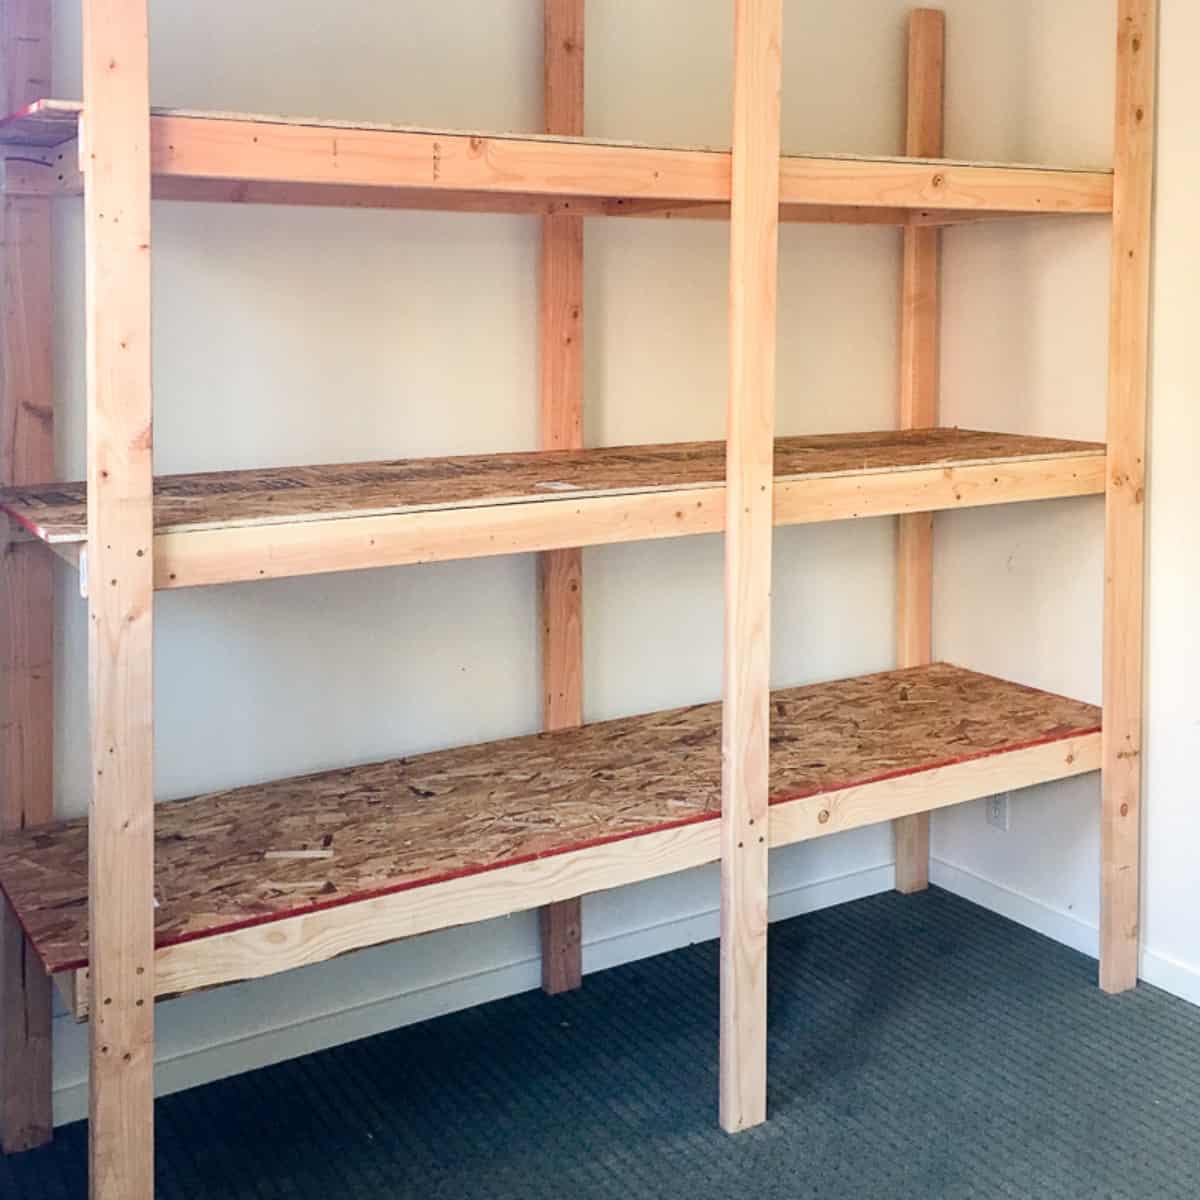 https://www.thehandymansdaughter.com/wp-content/uploads/2017/06/DIY-storage-shelves-from-2x4s-and-plywood.jpeg